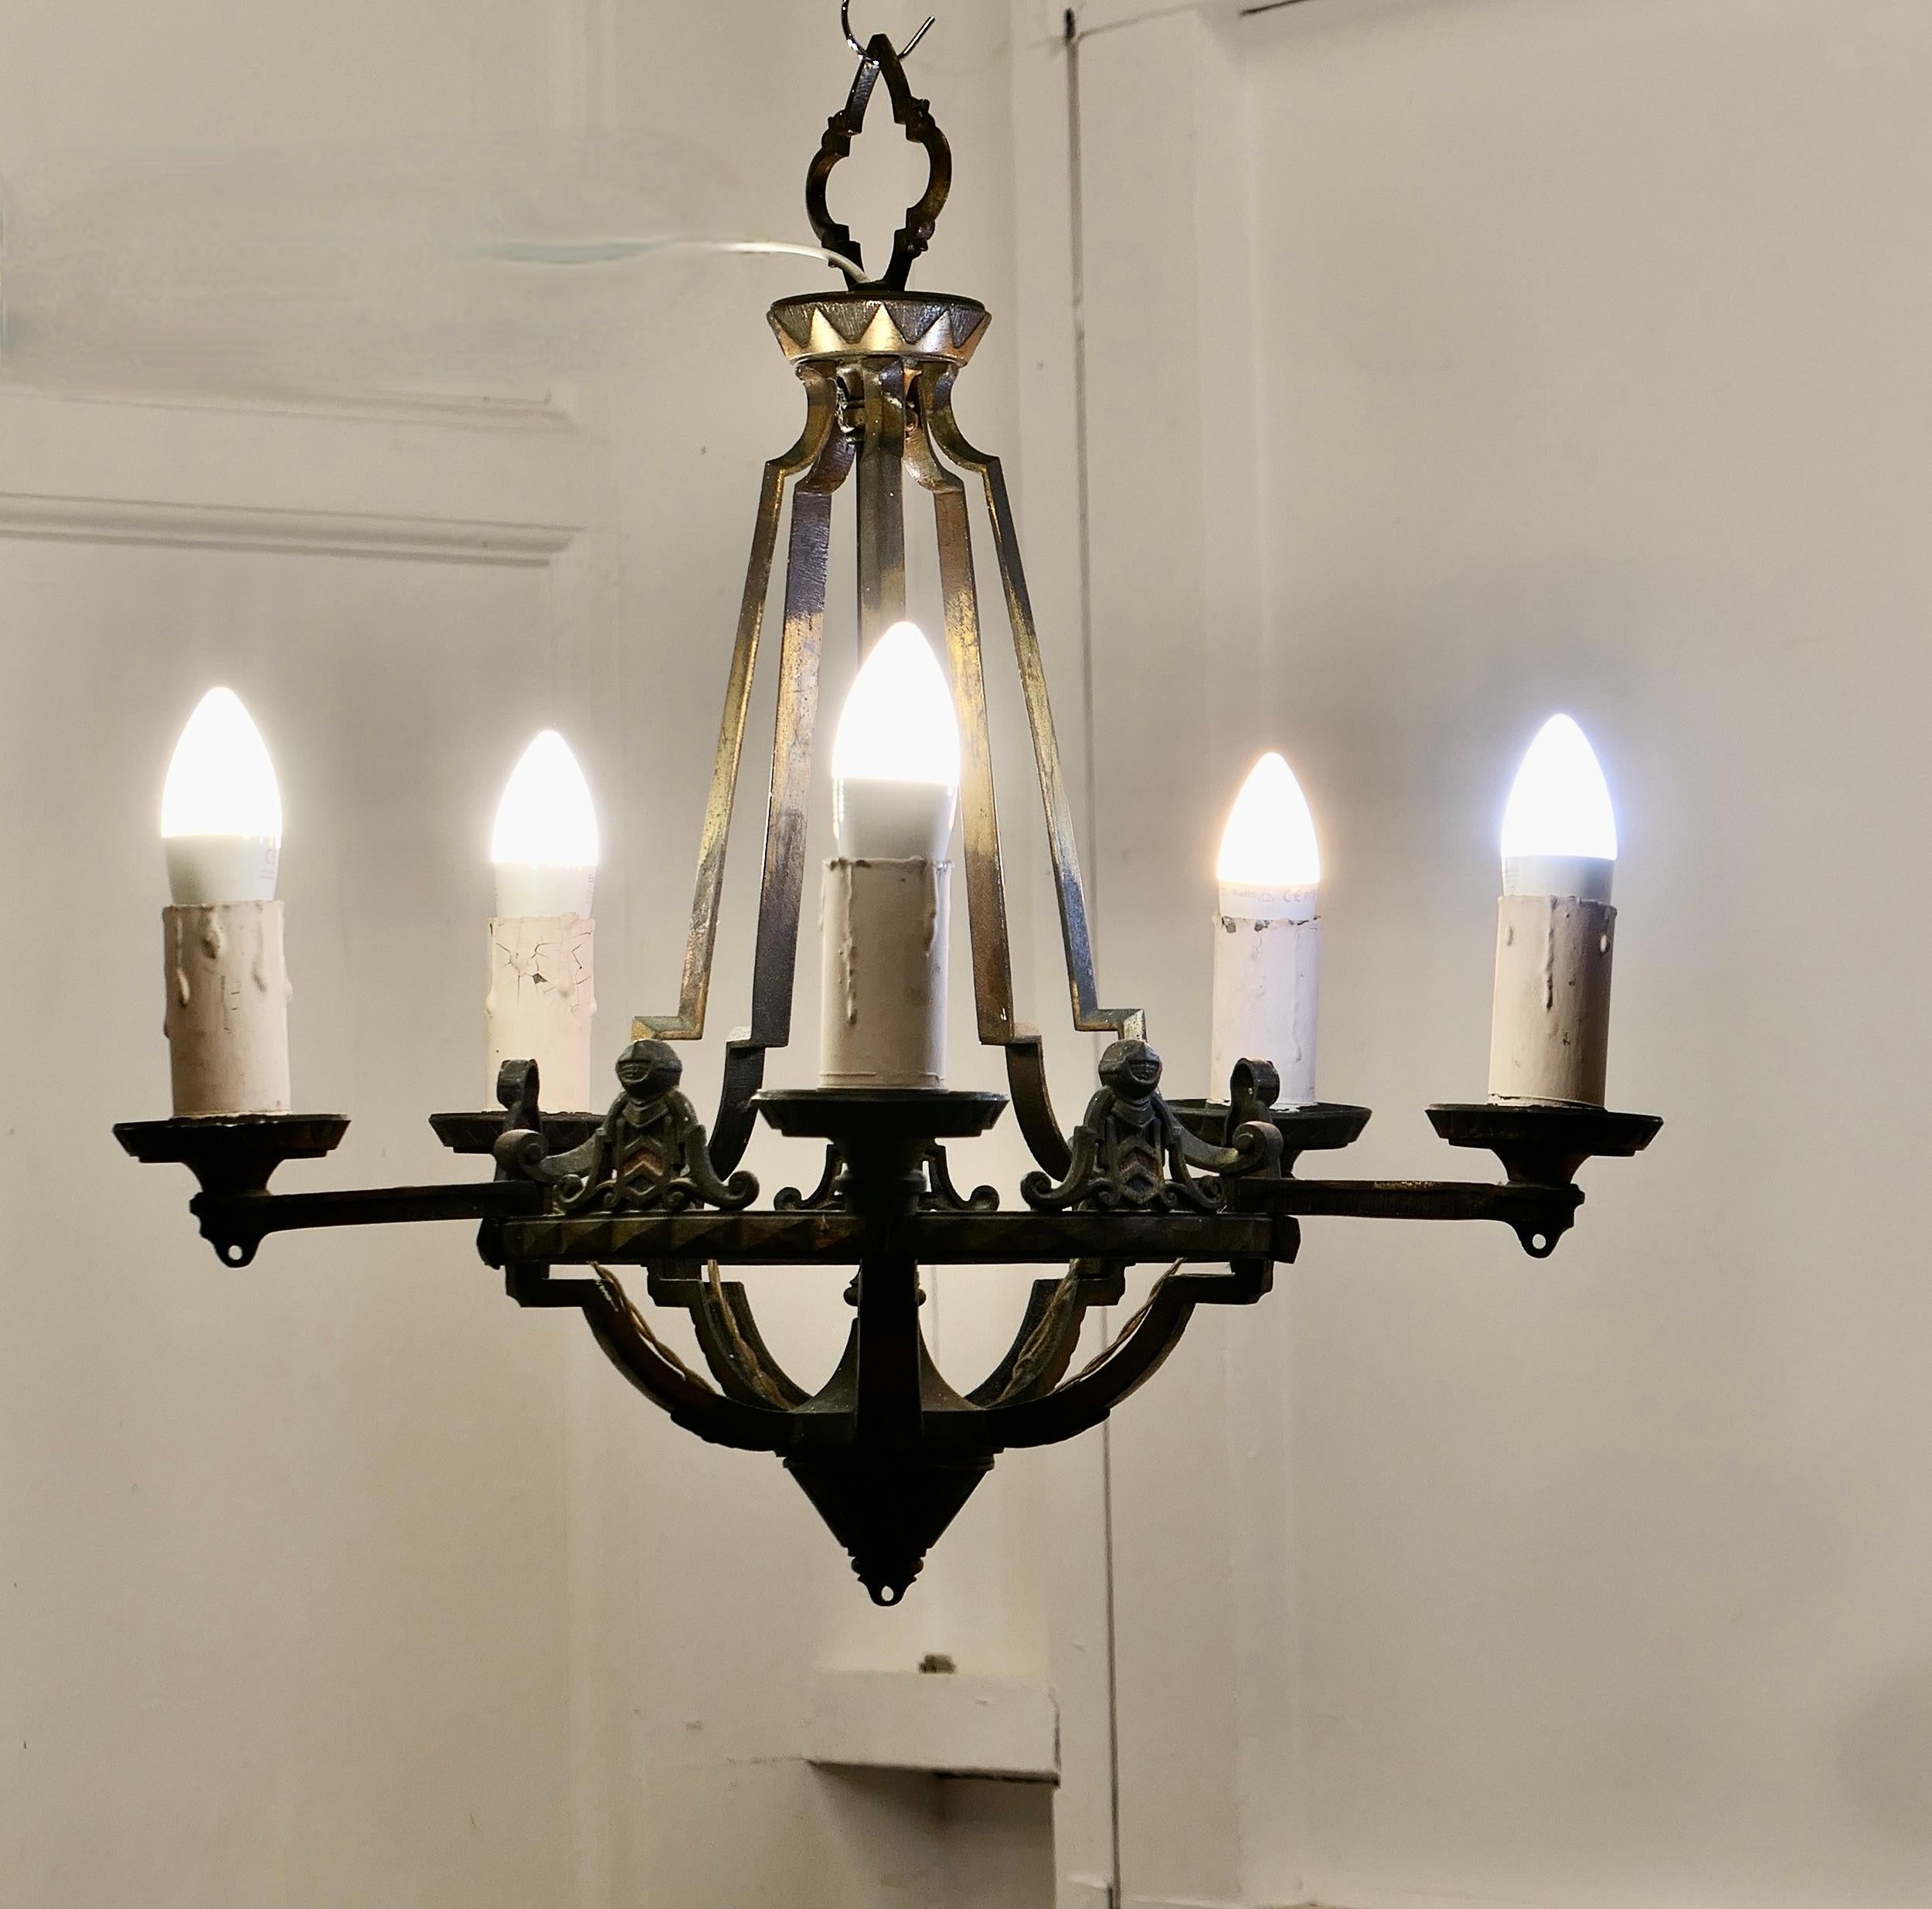 A Superb Medieval Look Iron Ceiling Light

A very handsome piece, the chandelier is Heavy and very Gothic in design, it is made in iron and cold painted much of this is worn away
The lamp has 5 branches and knight’s shields set between each if